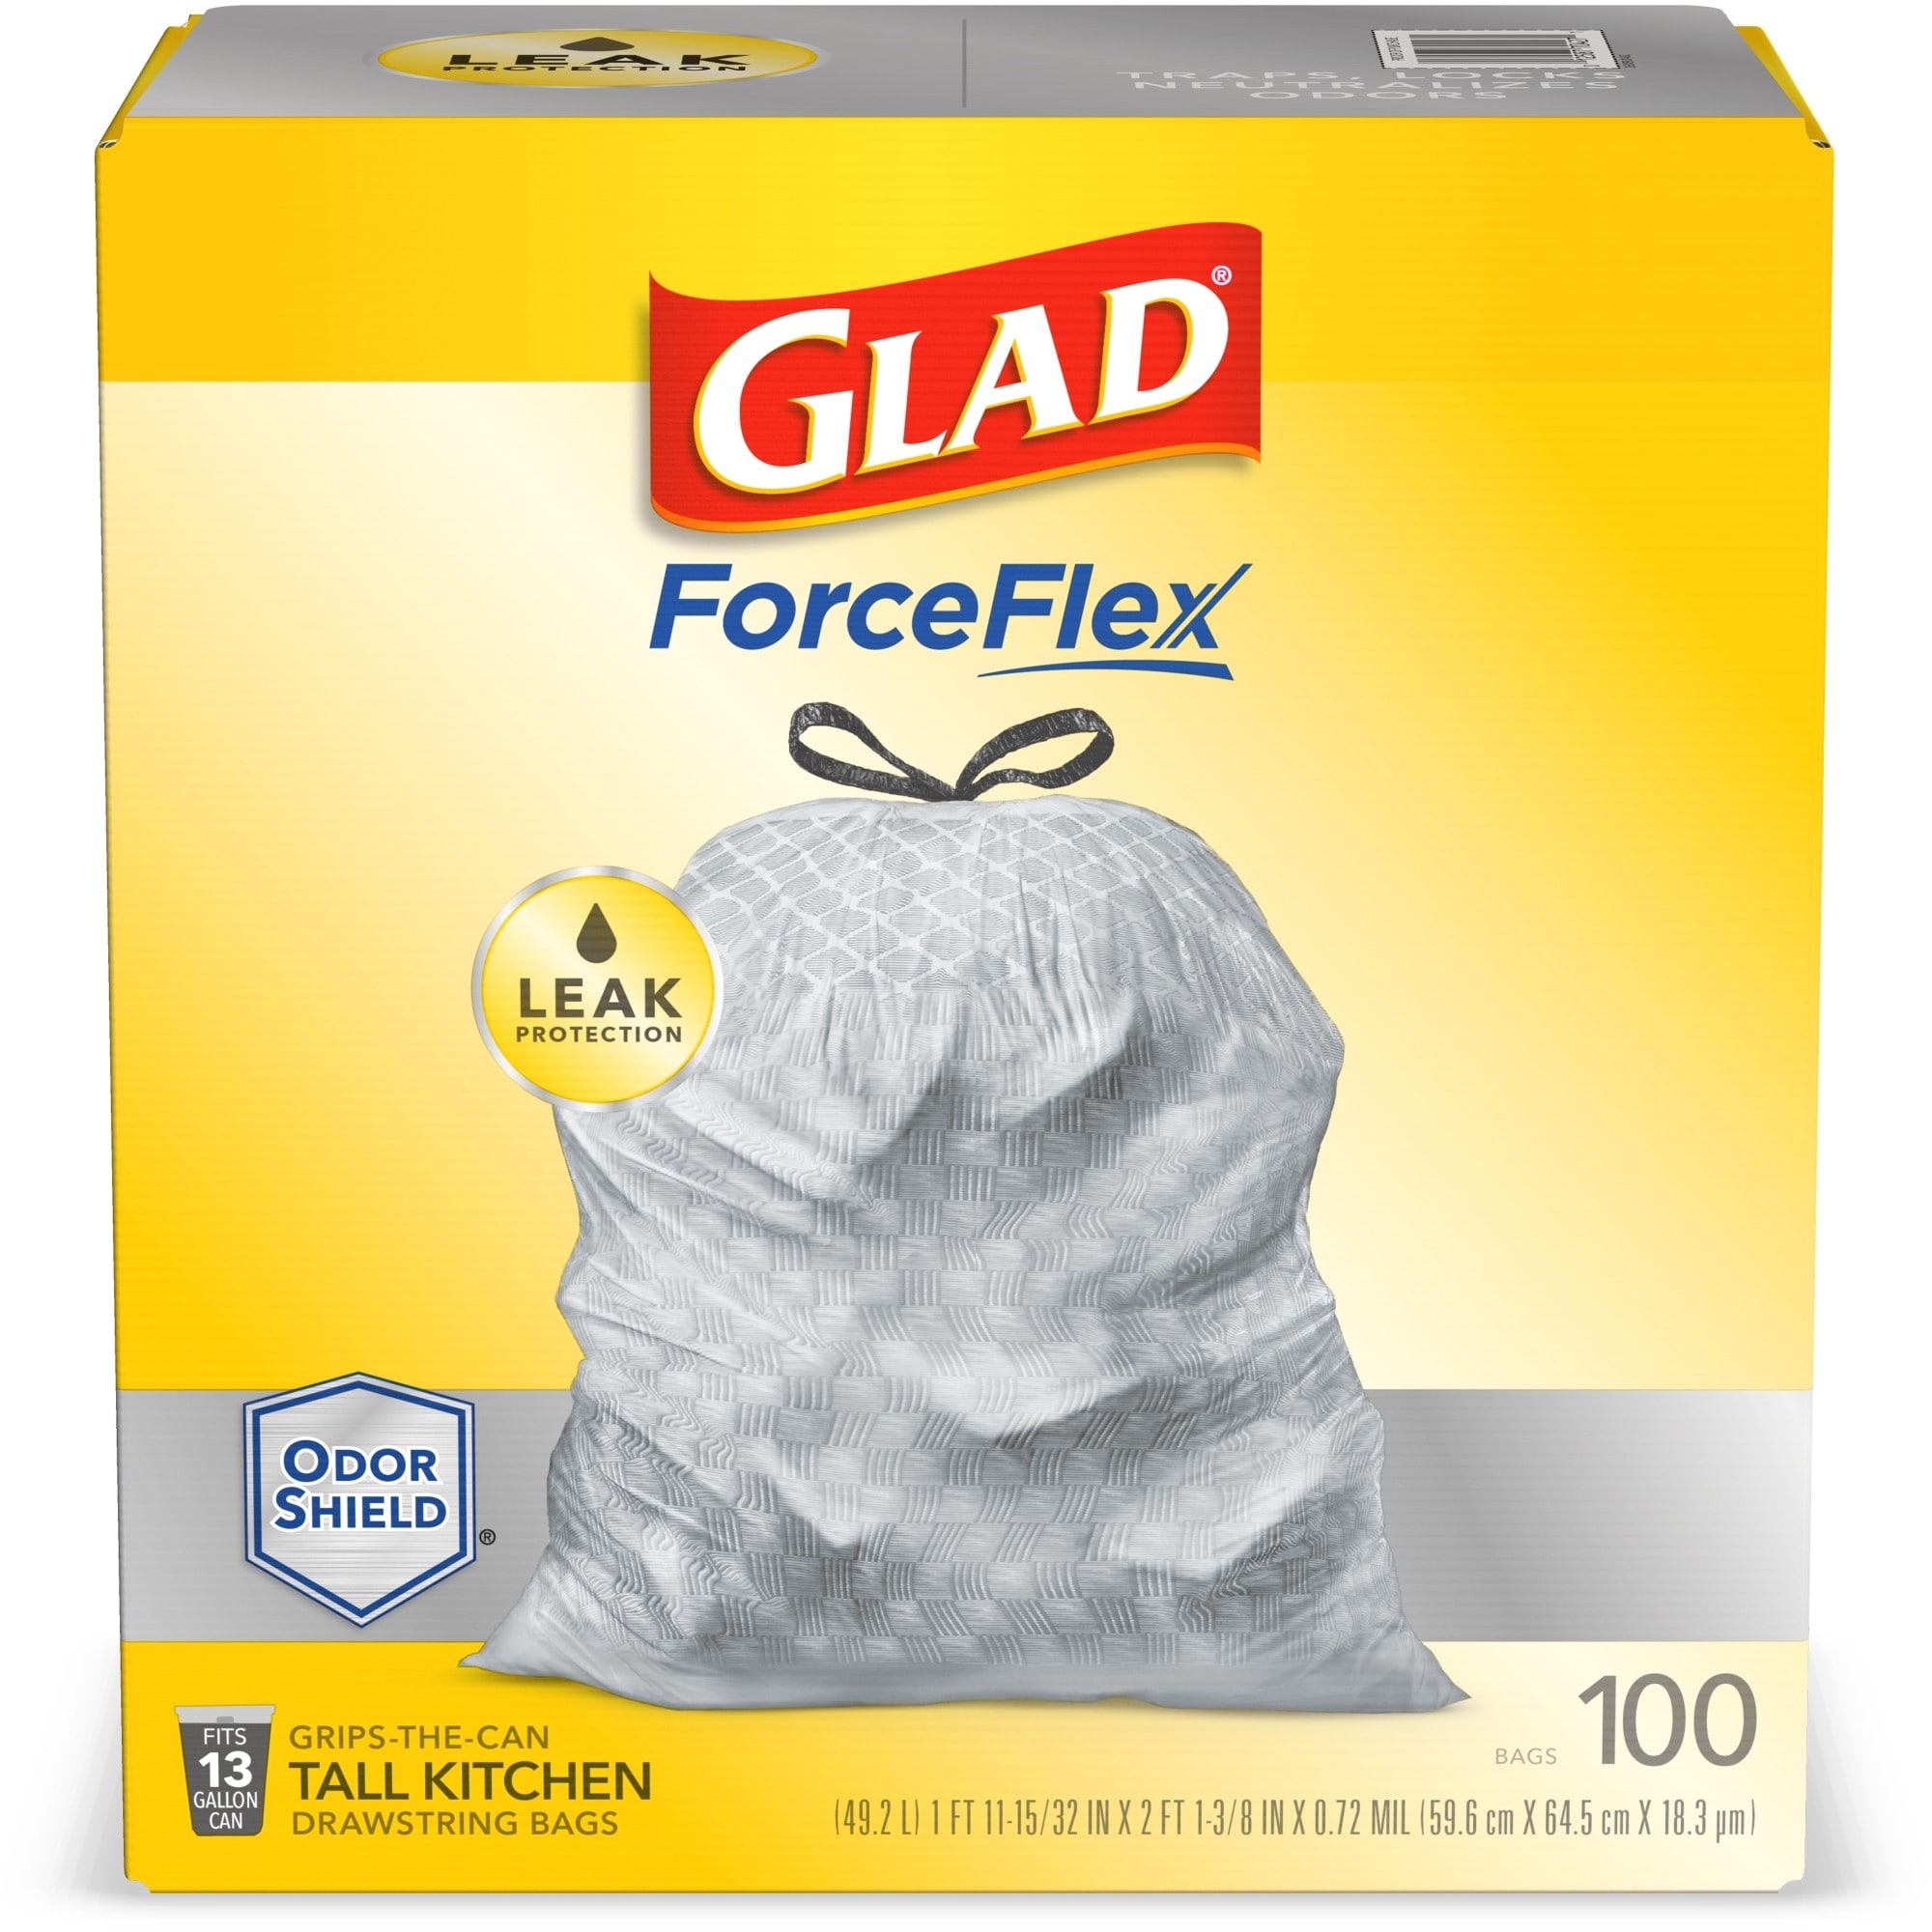 Save on Glad ForceFlex Max Strength Gain X-Large Drawstring Kitchen Bags 20  Gallon Order Online Delivery